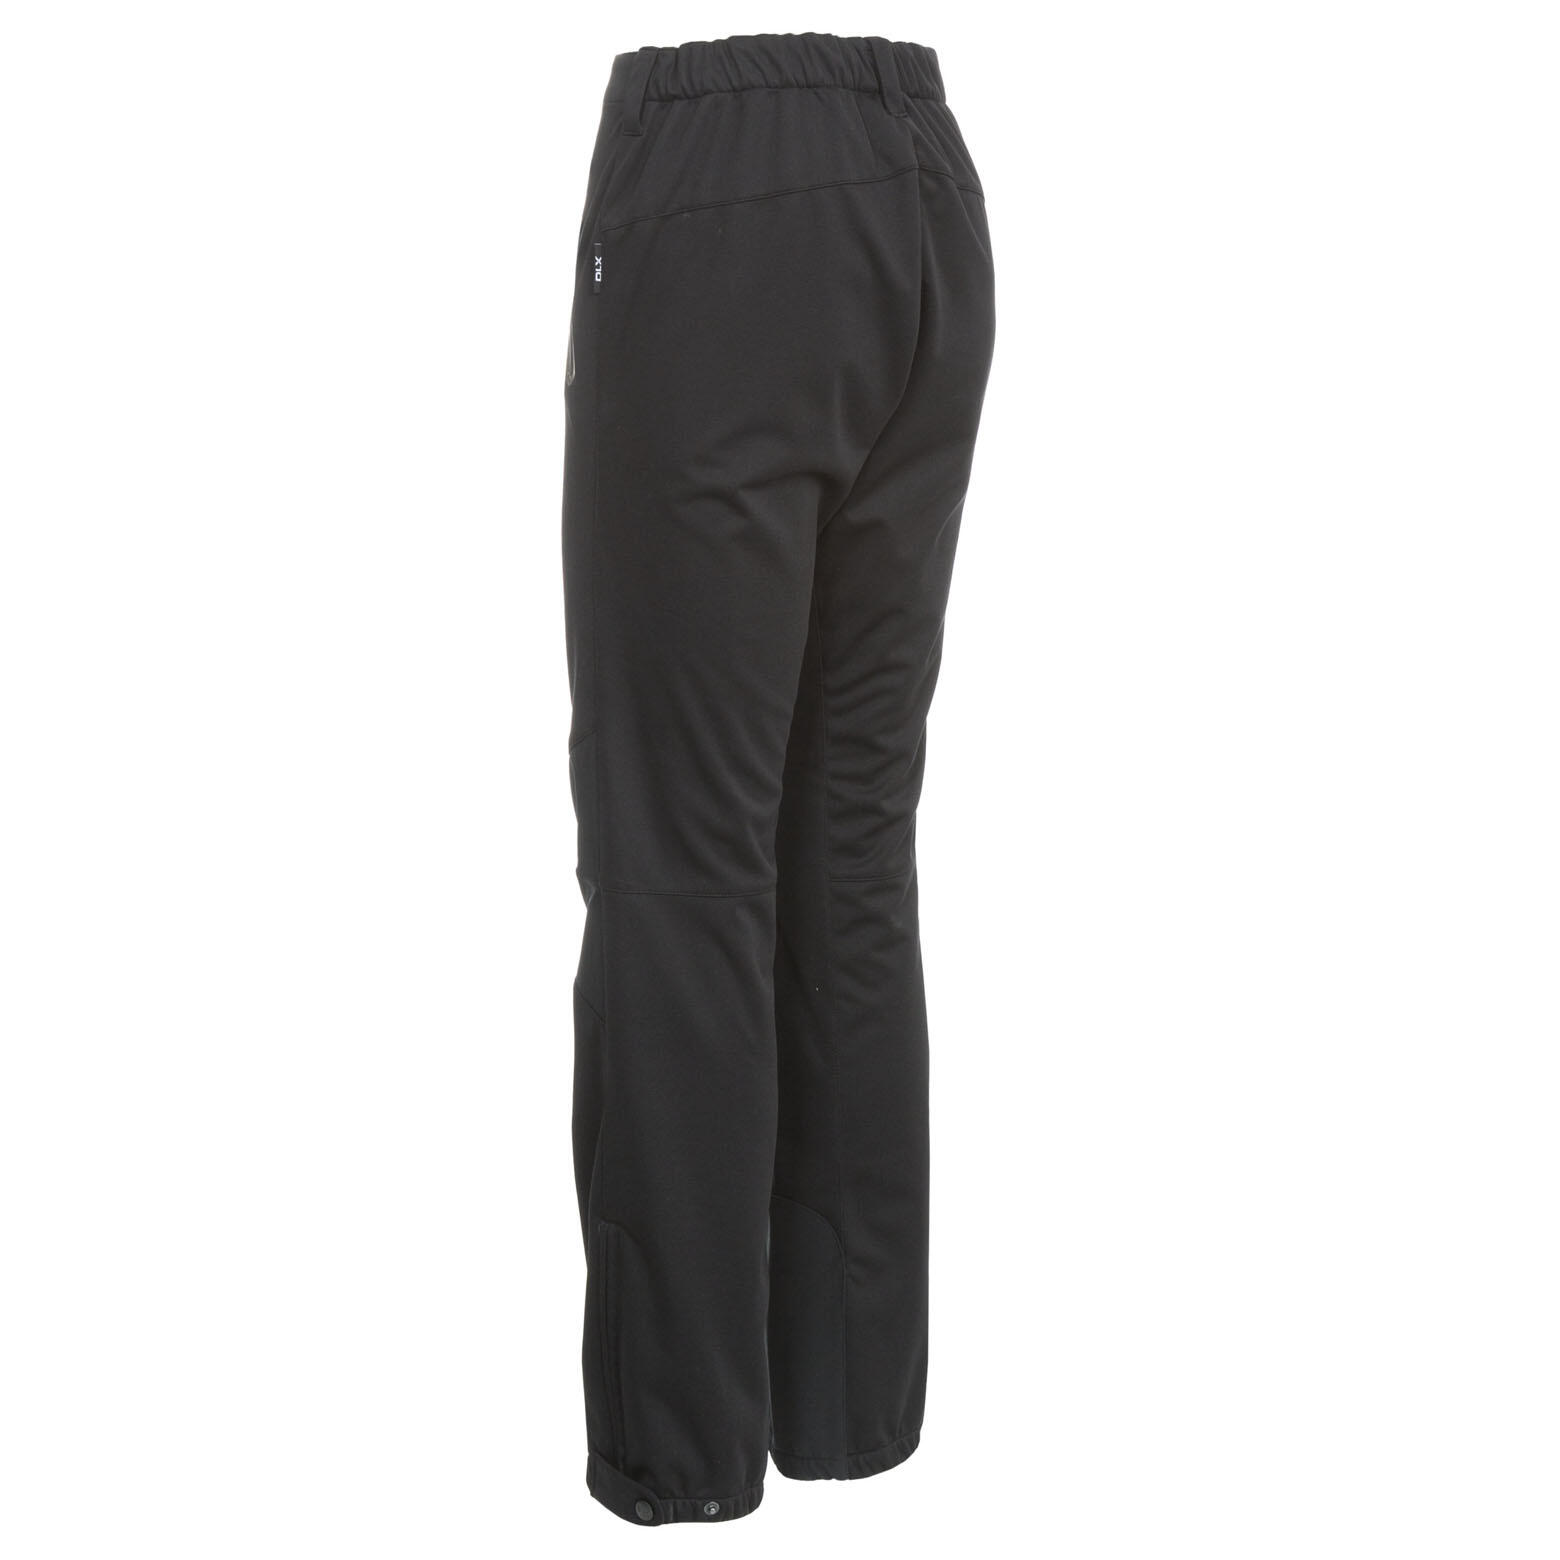 Womens Walking Trousers Softshell Hiking Pants with 3 Pockets Sola 2/5